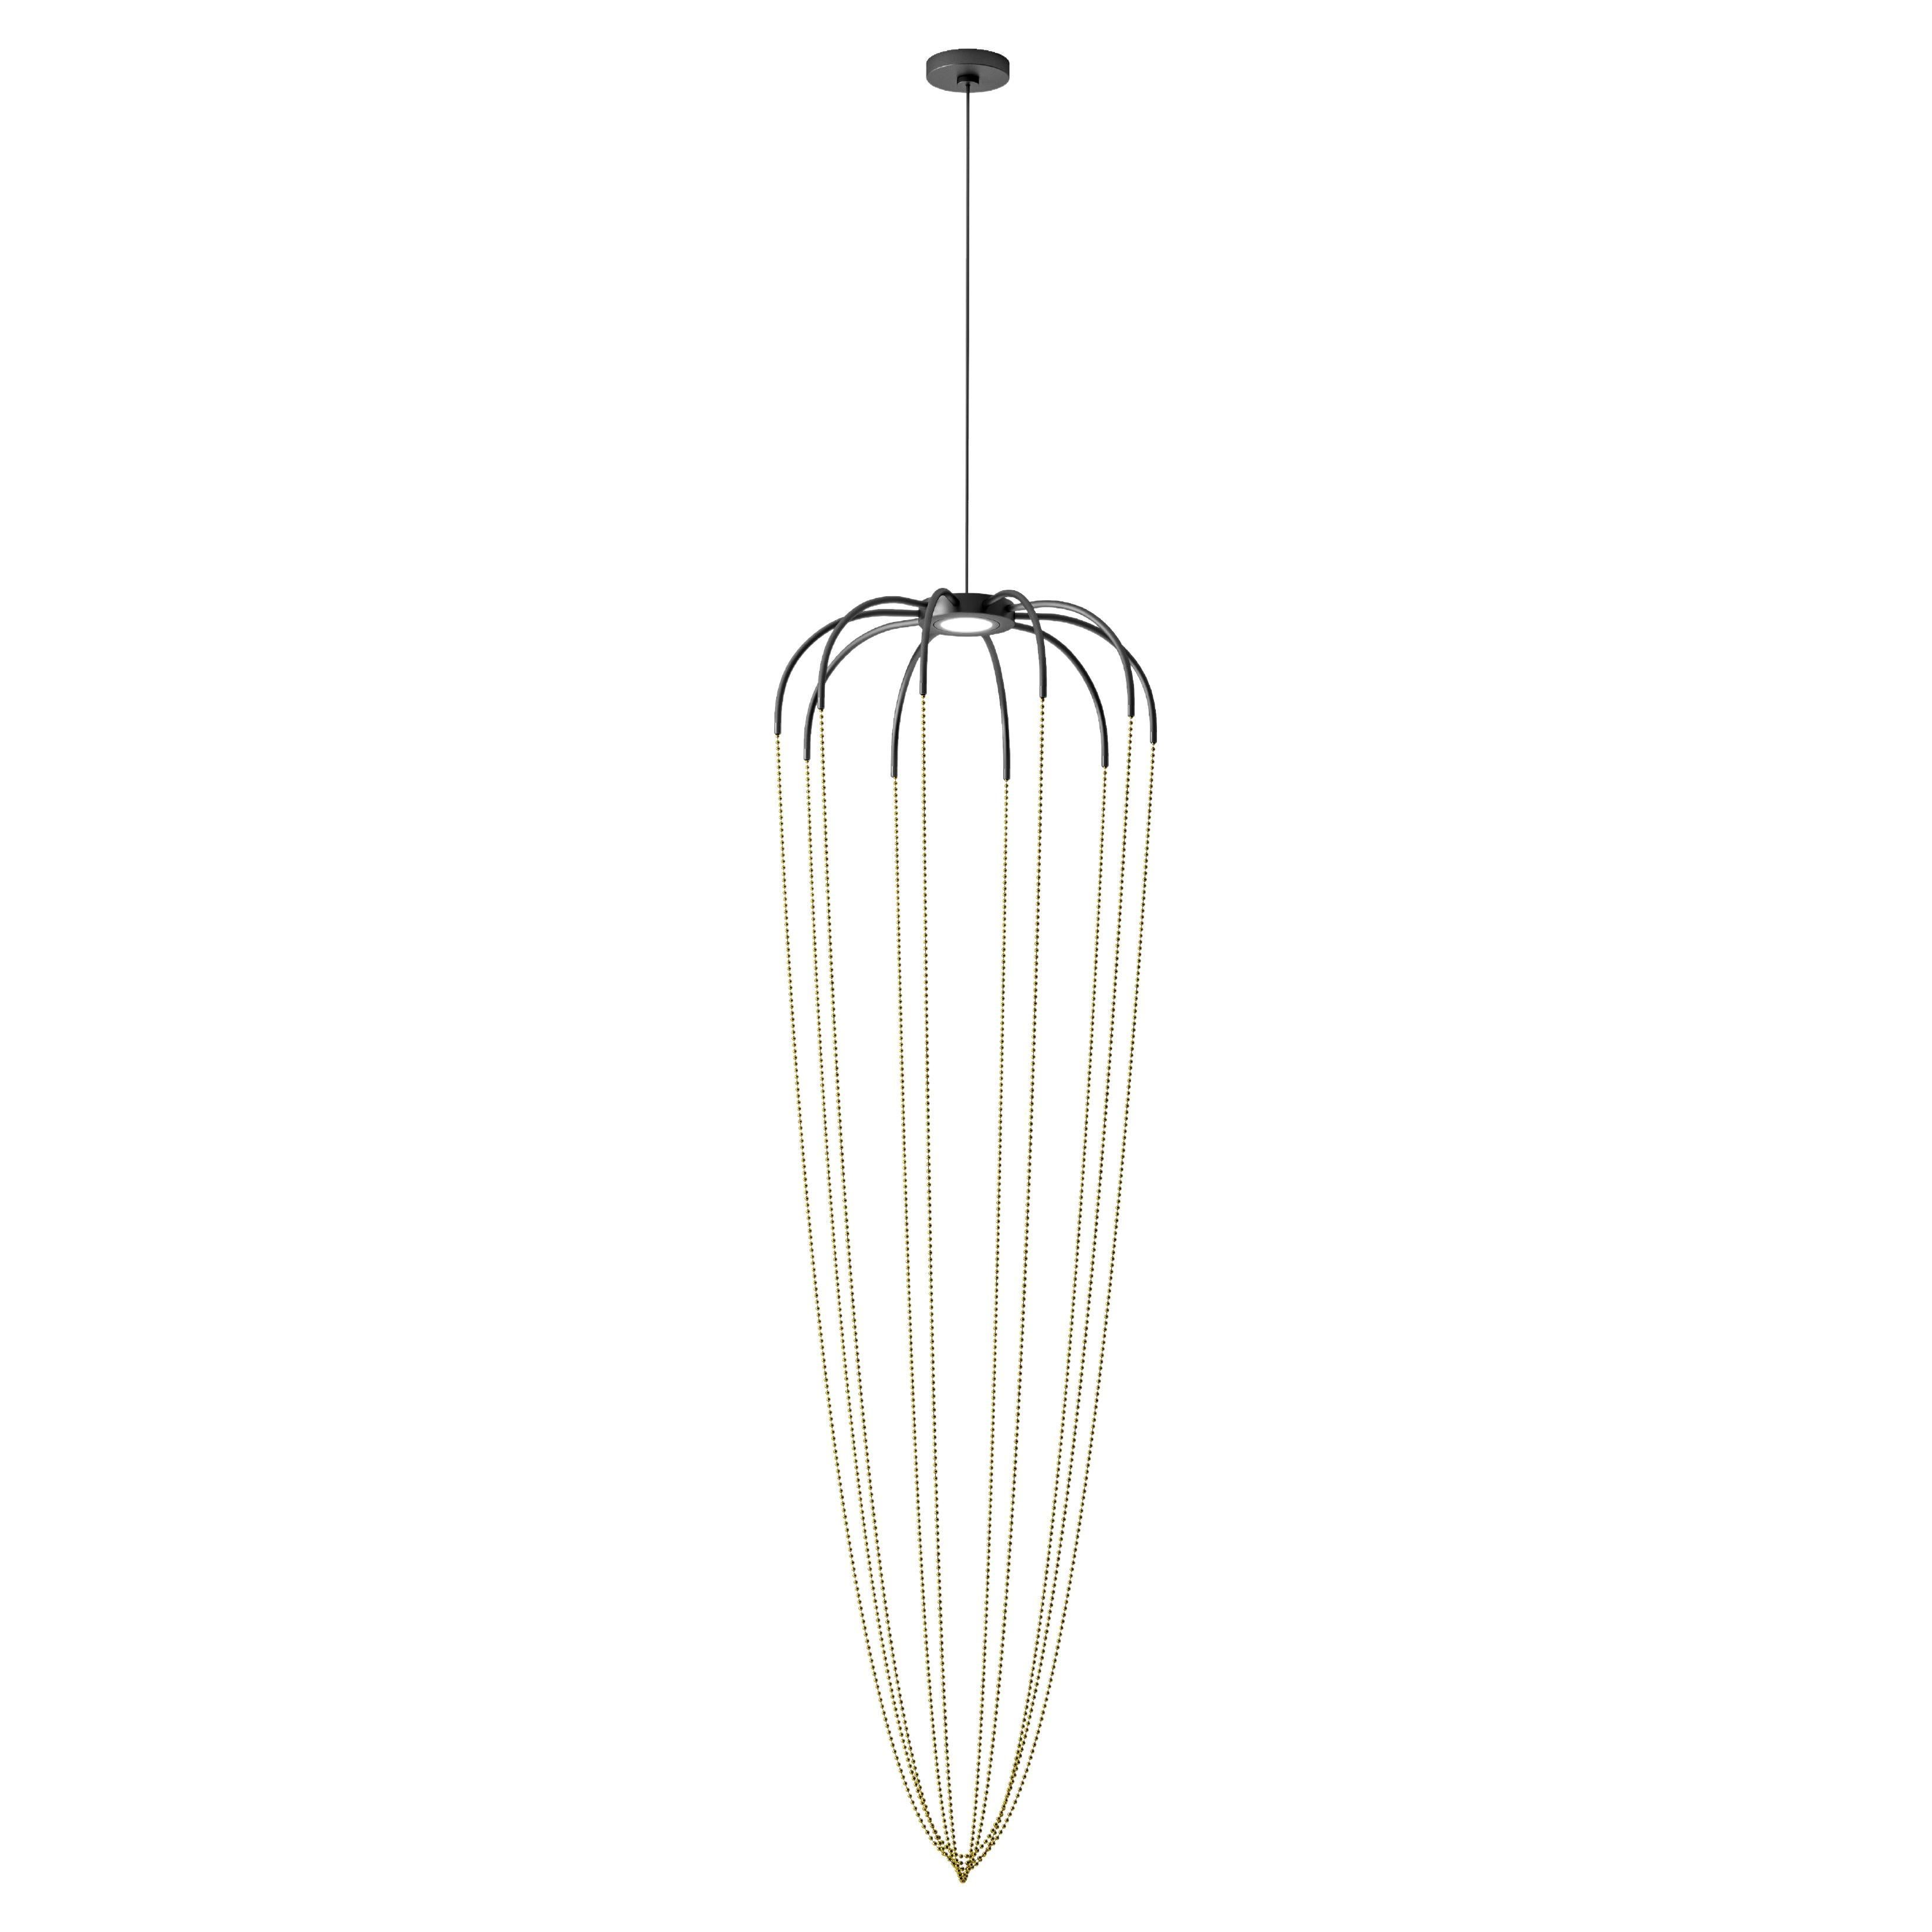 Axolight Alysoid Large Pendant Lamp in Anthracite Grey with Brass Chains